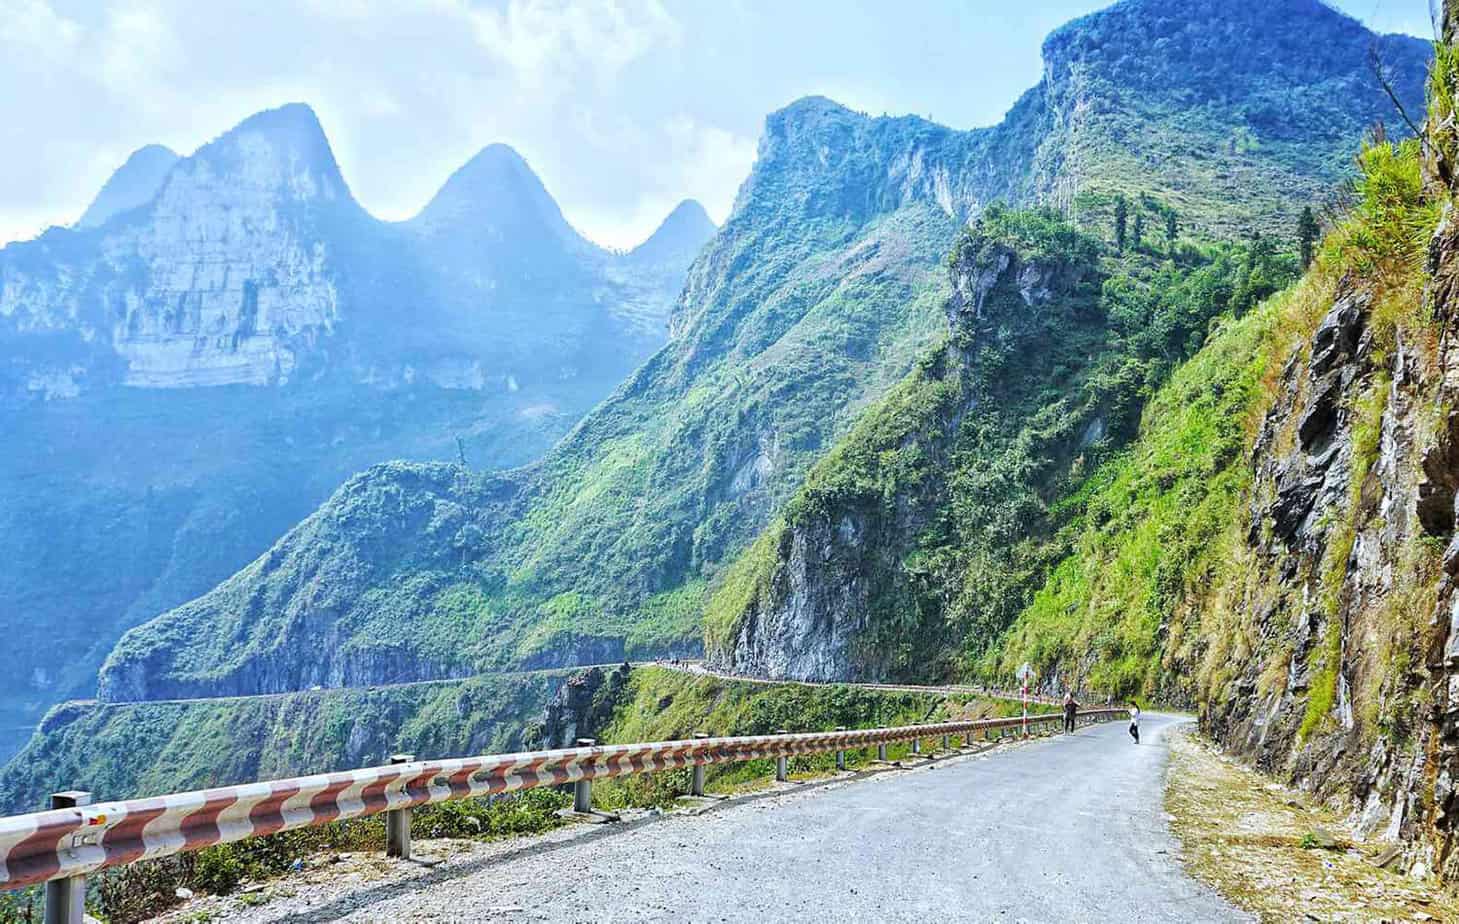 Mountain Passes in Northern Vietnam - Ma Pi Leng Pass